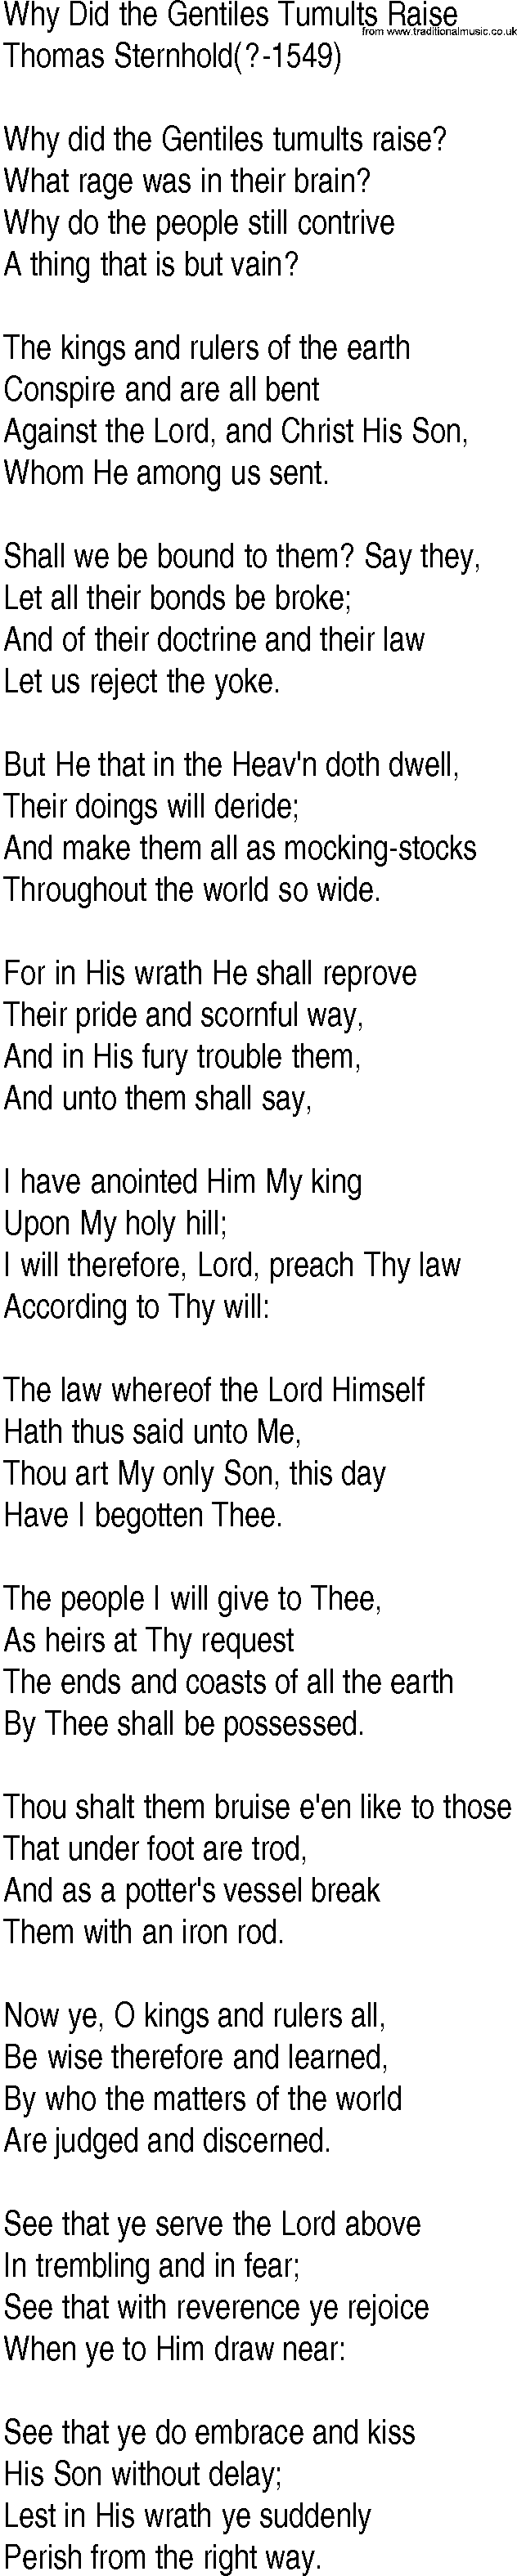 Hymn and Gospel Song: Why Did the Gentiles Tumults Raise by Thomas Sternhold lyrics